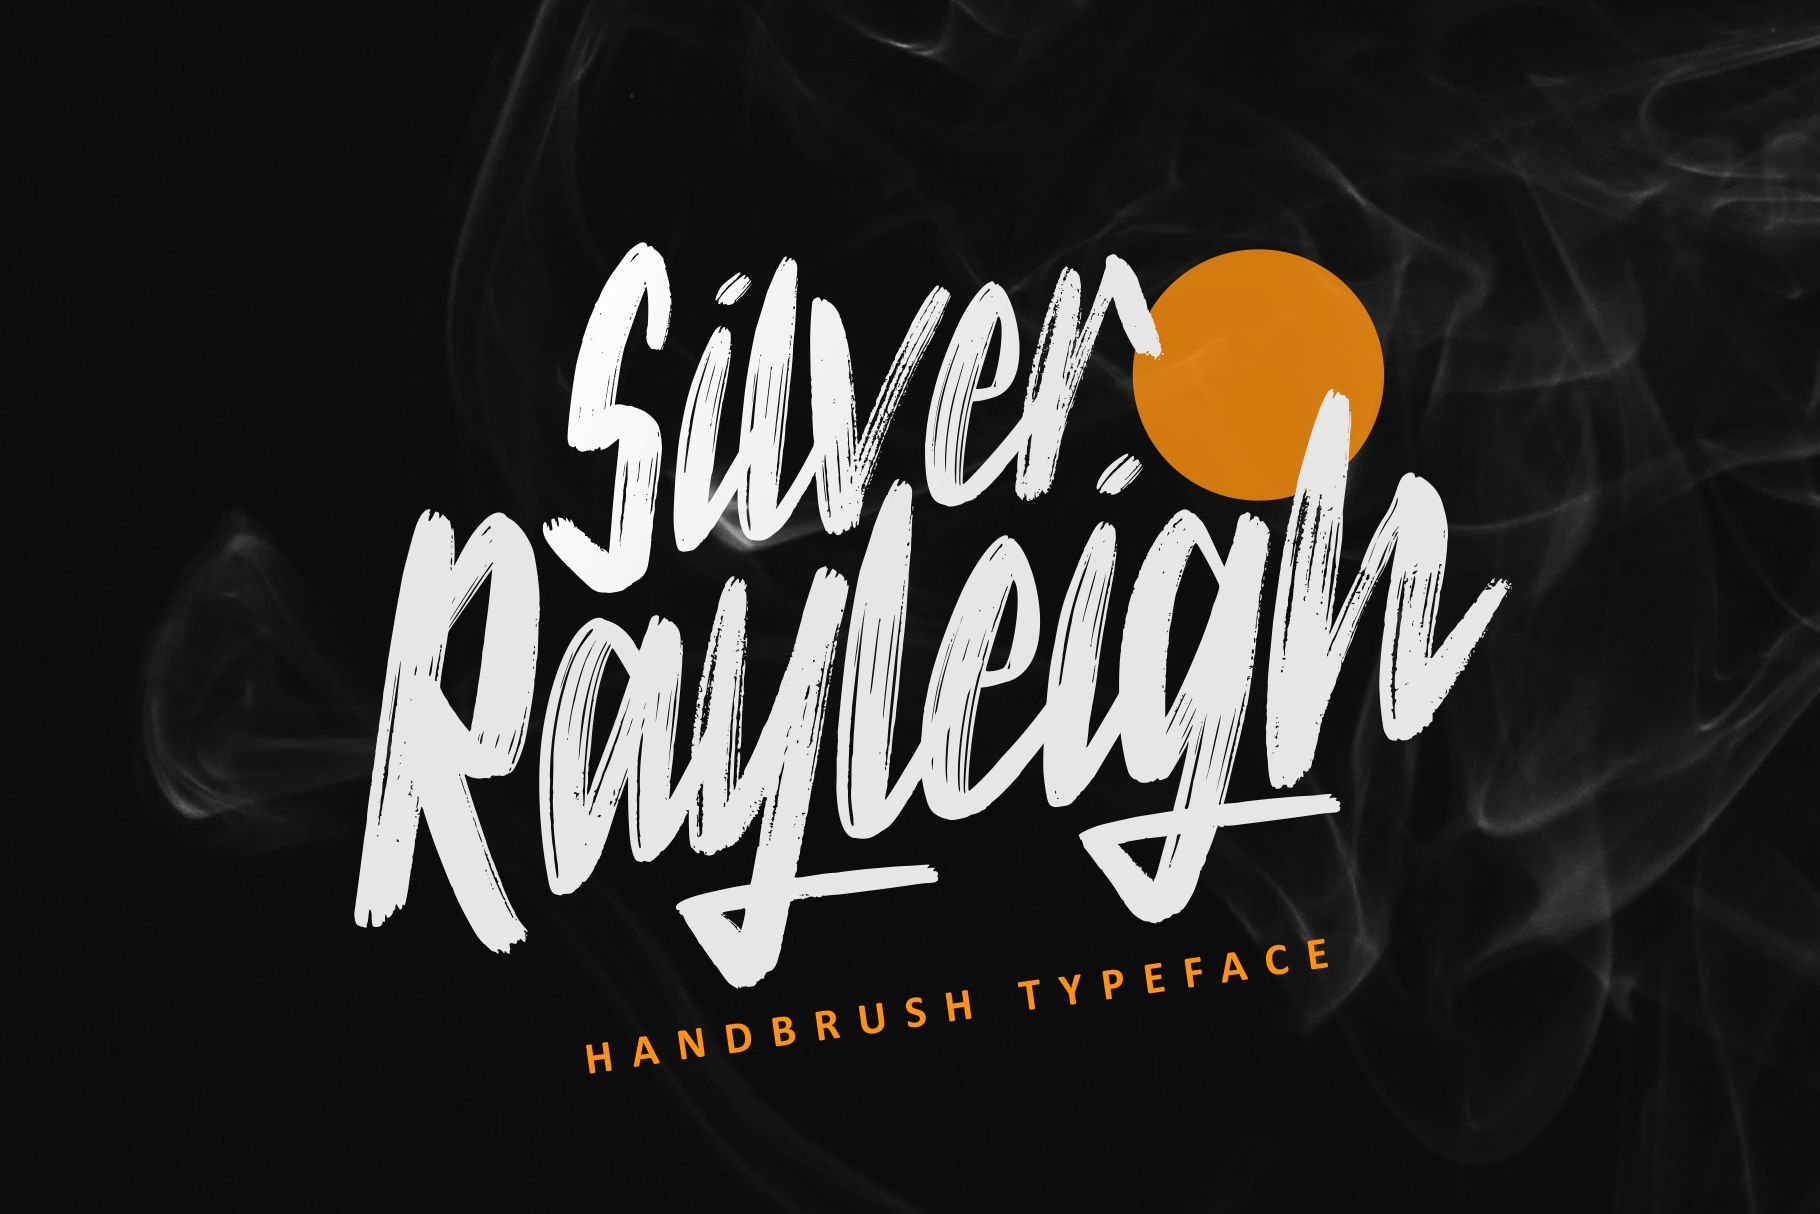 Silver Rayleigh - HandBrush Typeface cover image.